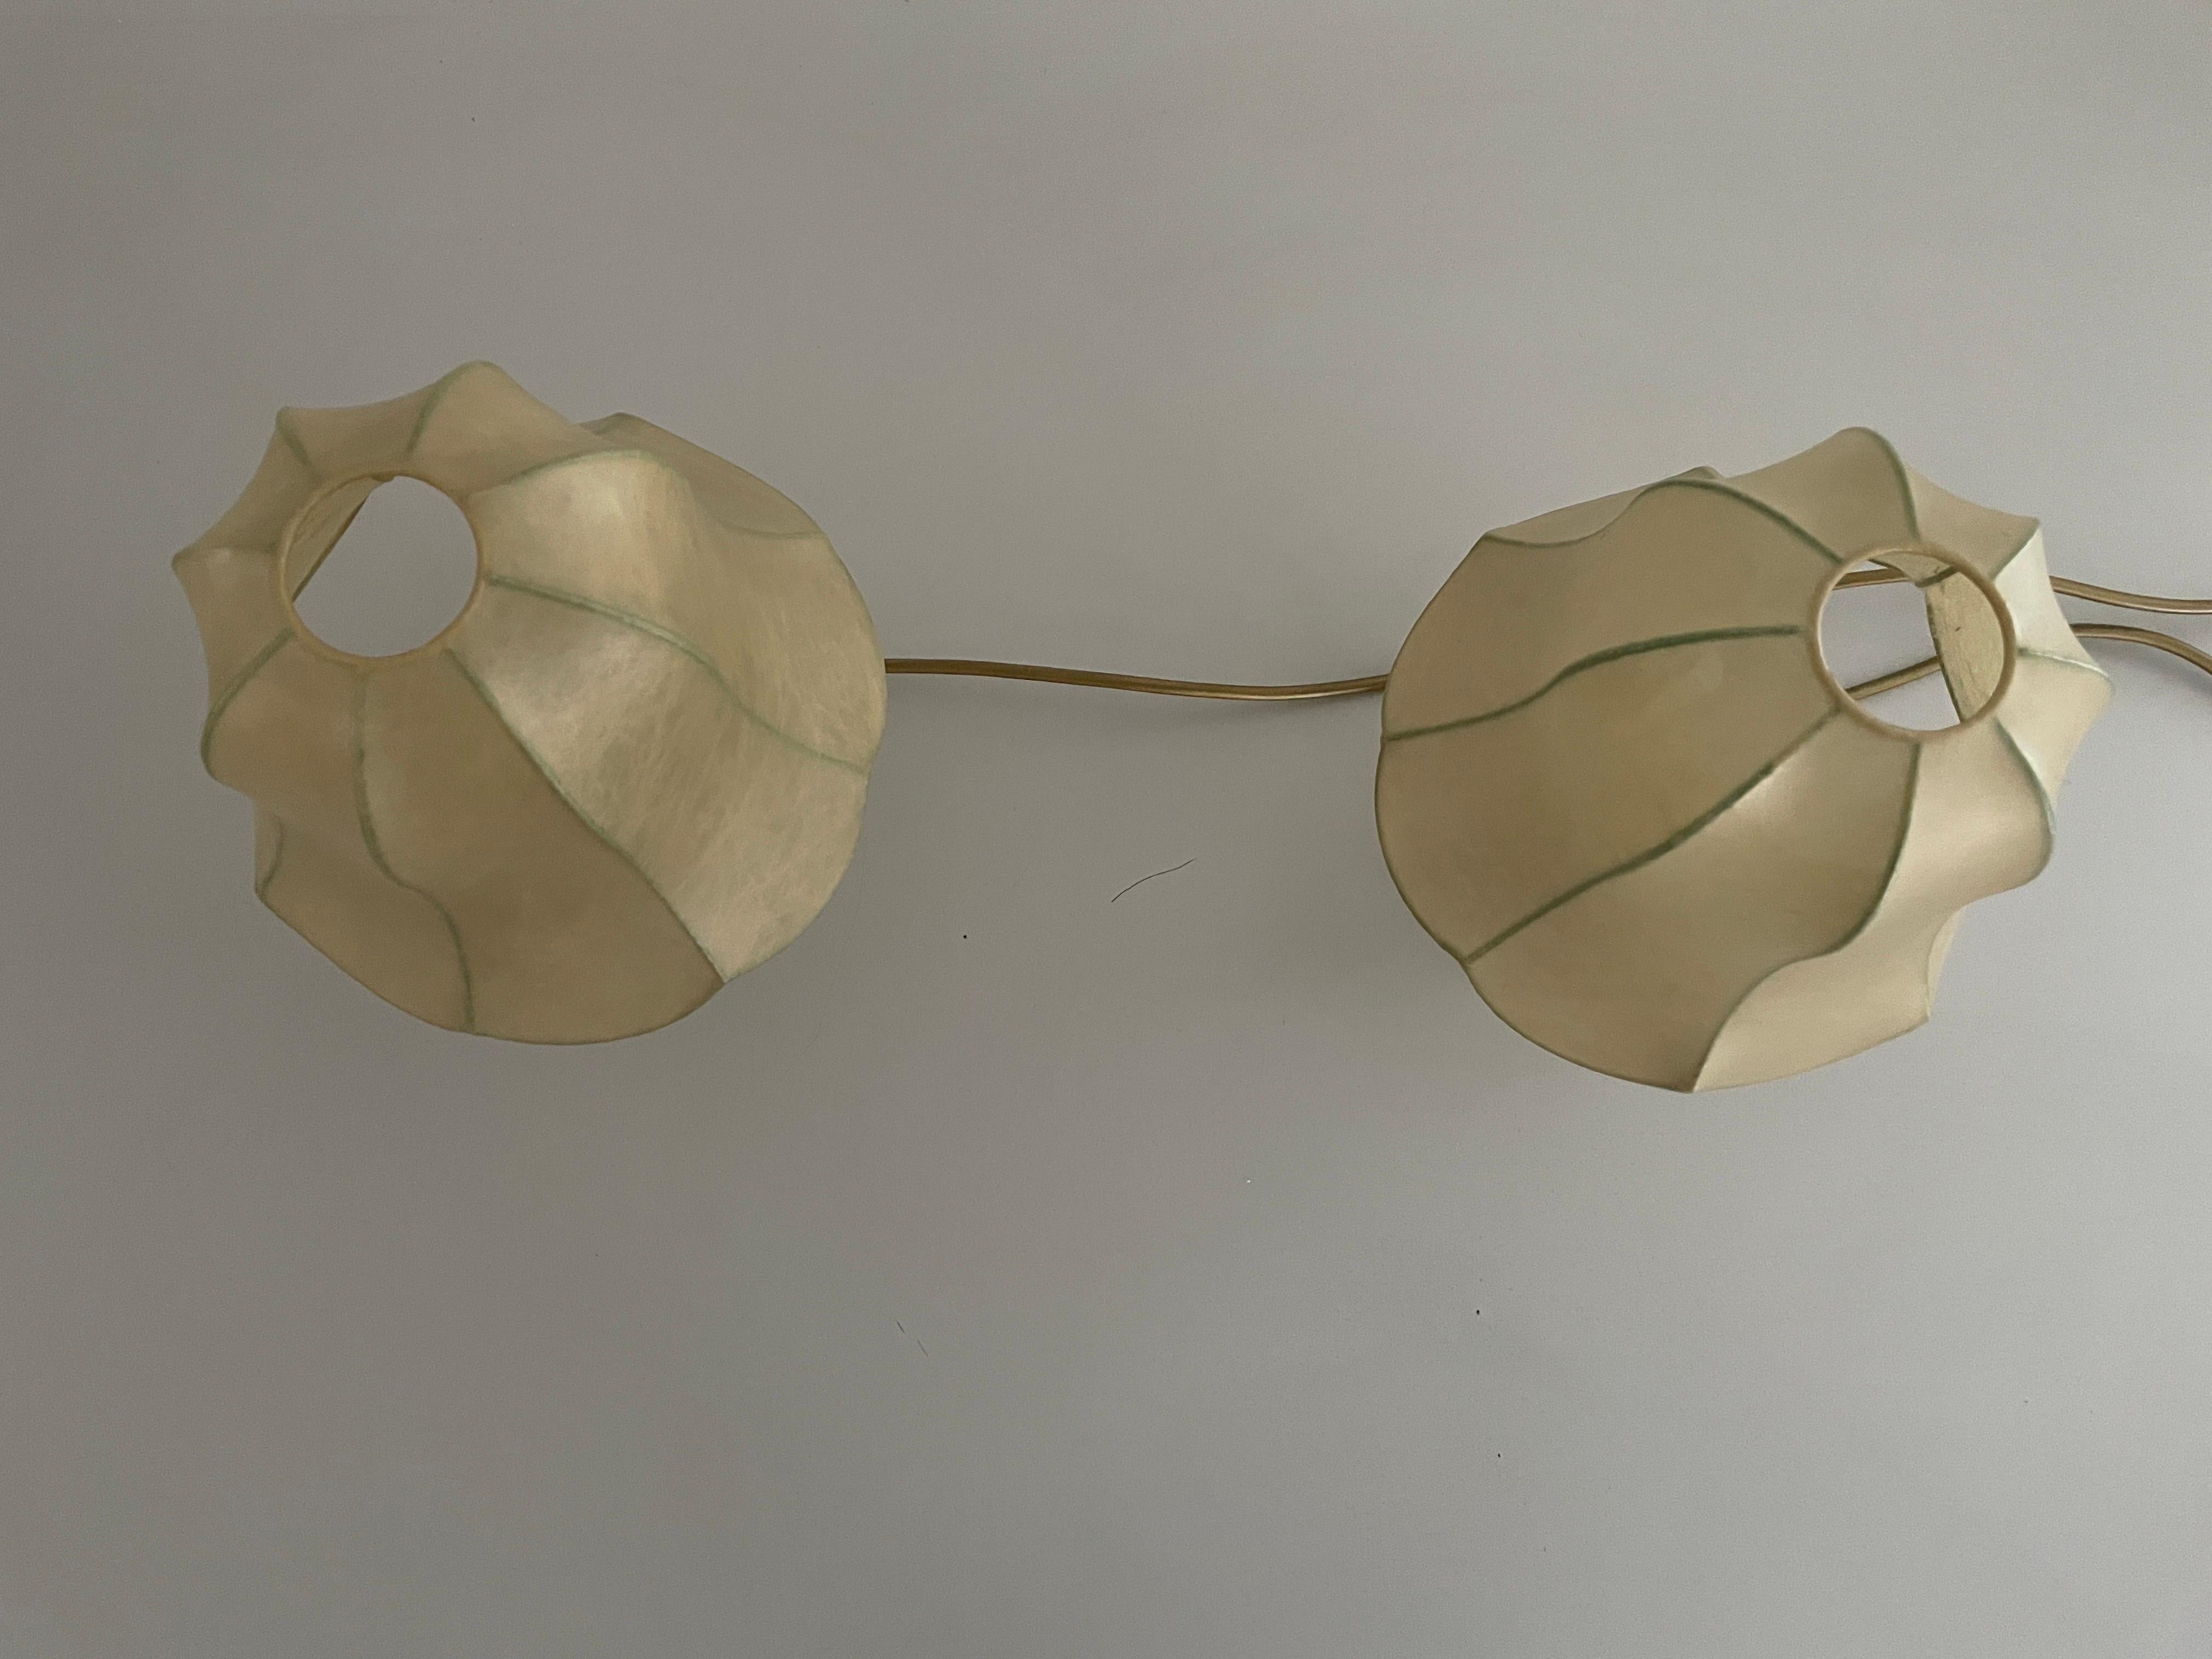 Late 20th Century Cocoon Shade Metal Body Pair of Bedside Lamps by GOLDKANT, 1970s, Germany For Sale